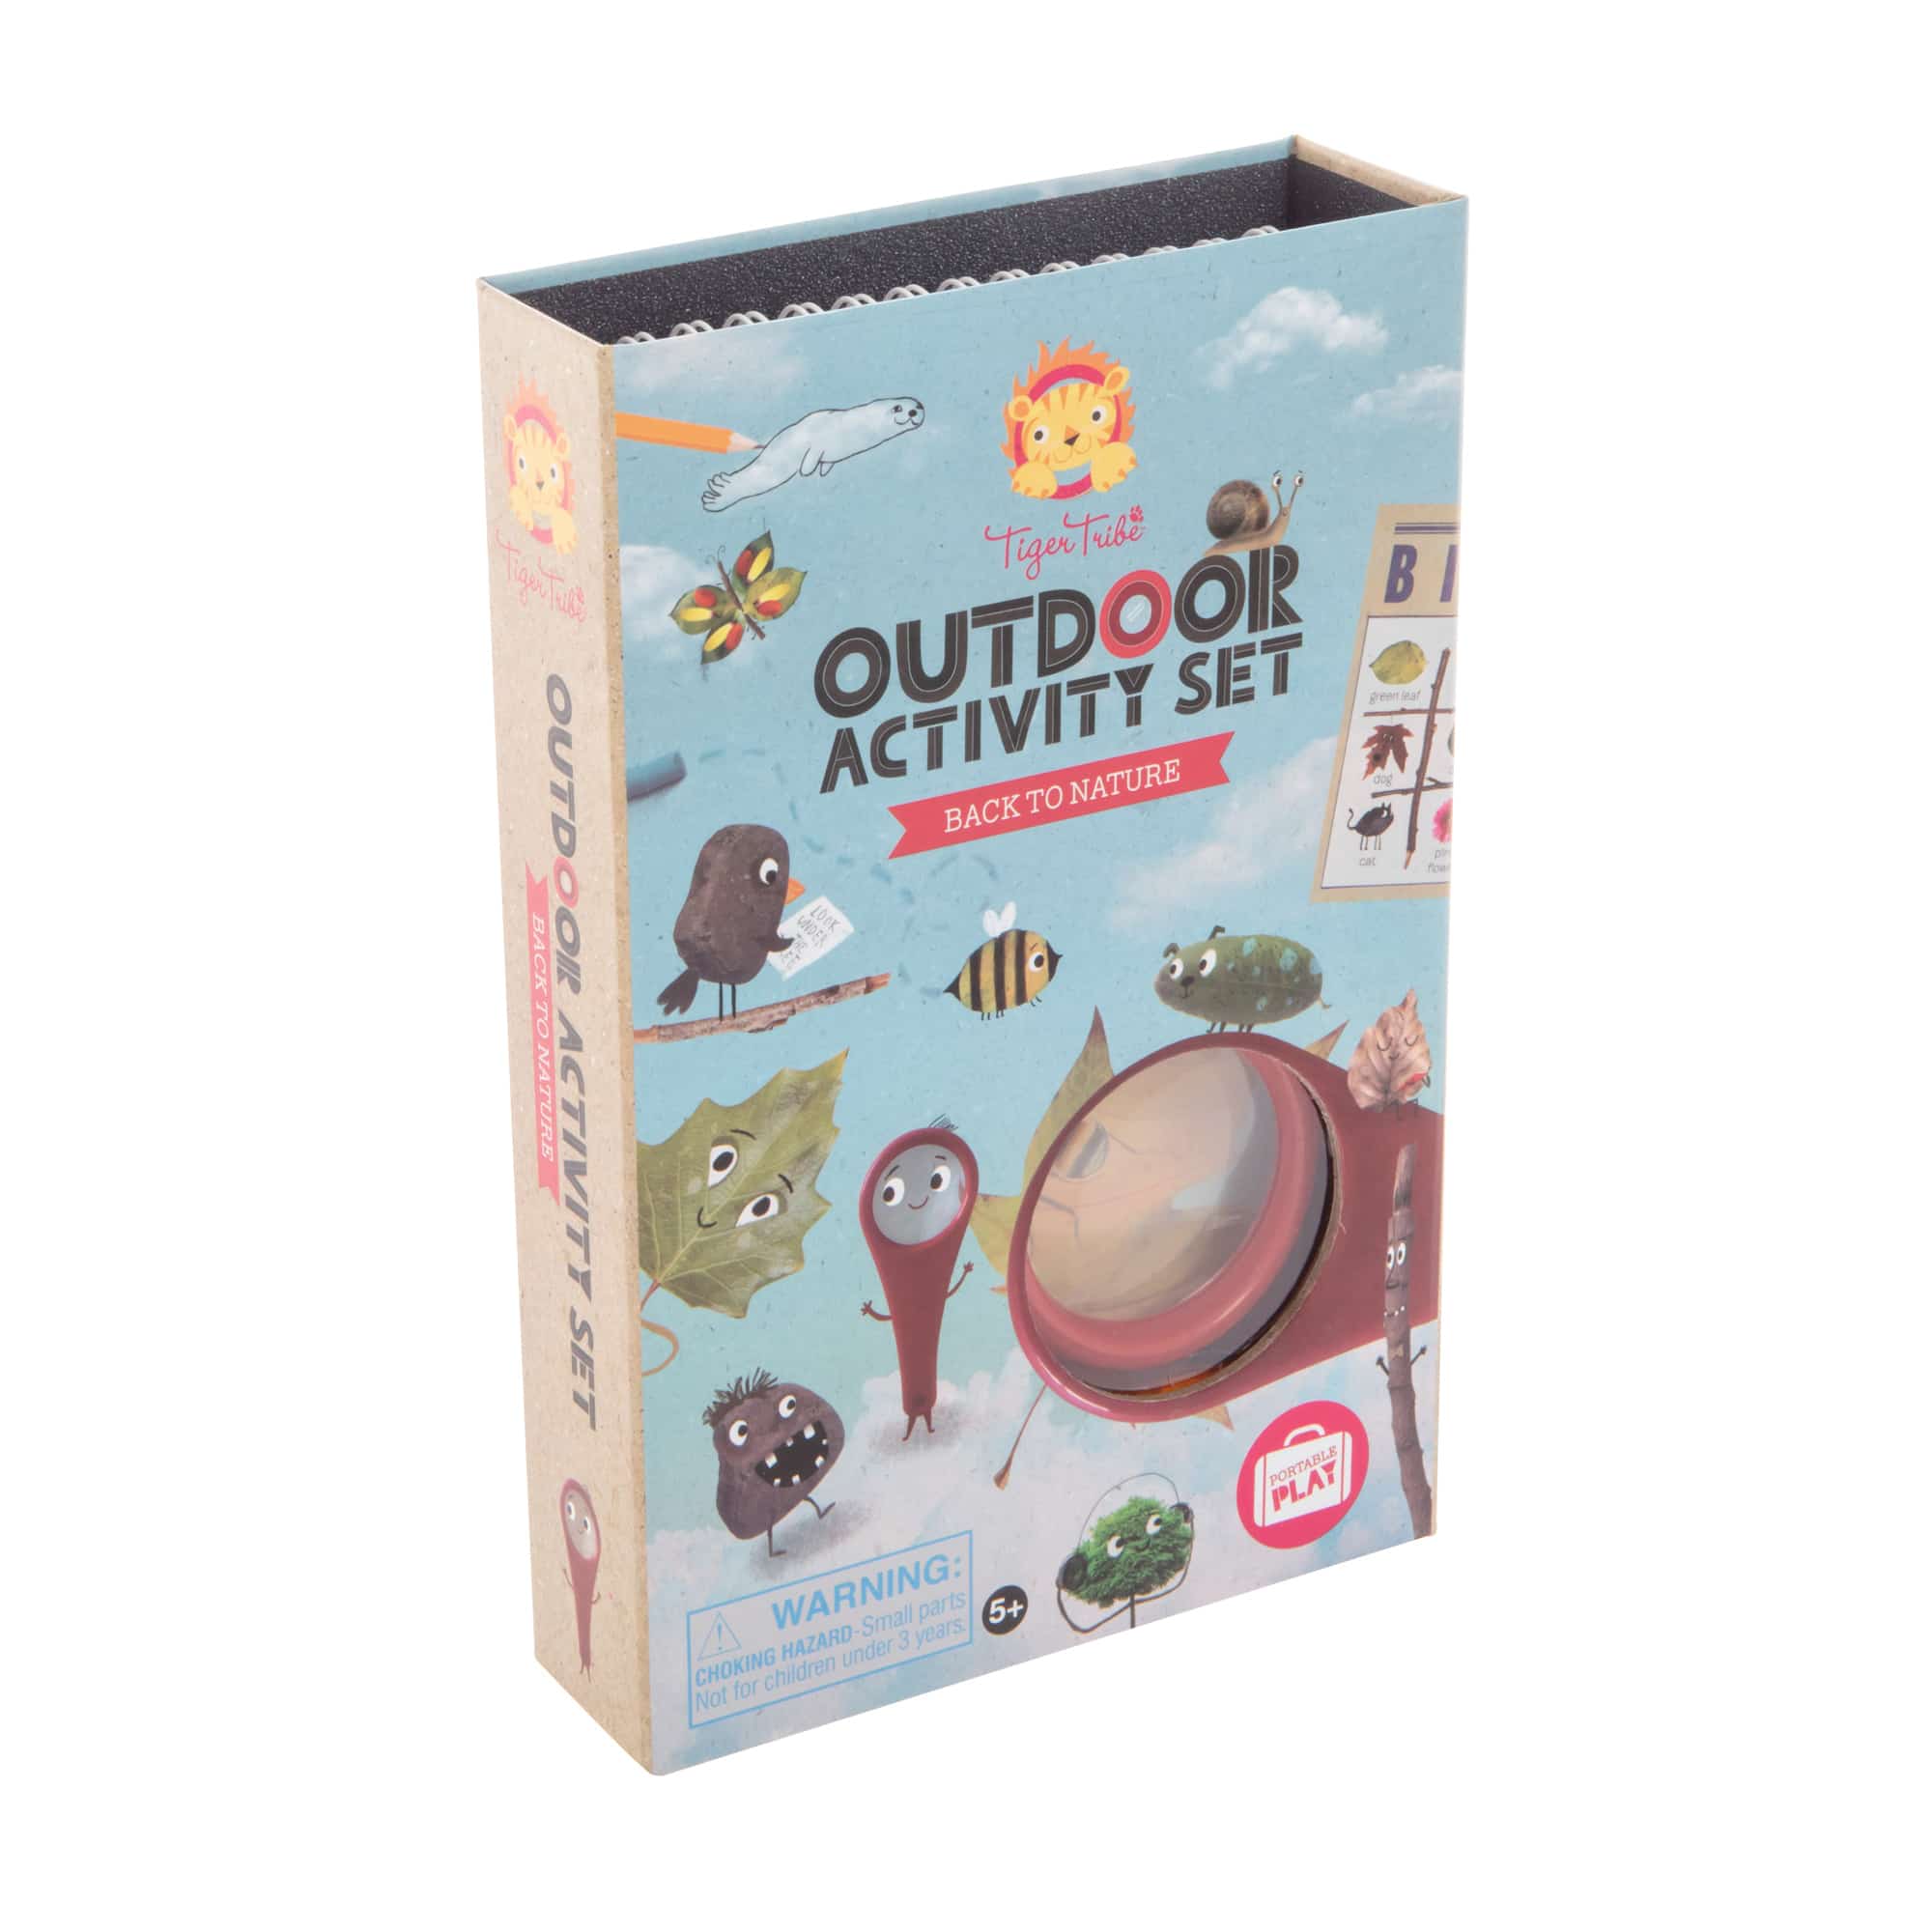 Back To Nature: Outdoor Activity Set - Ages 5+